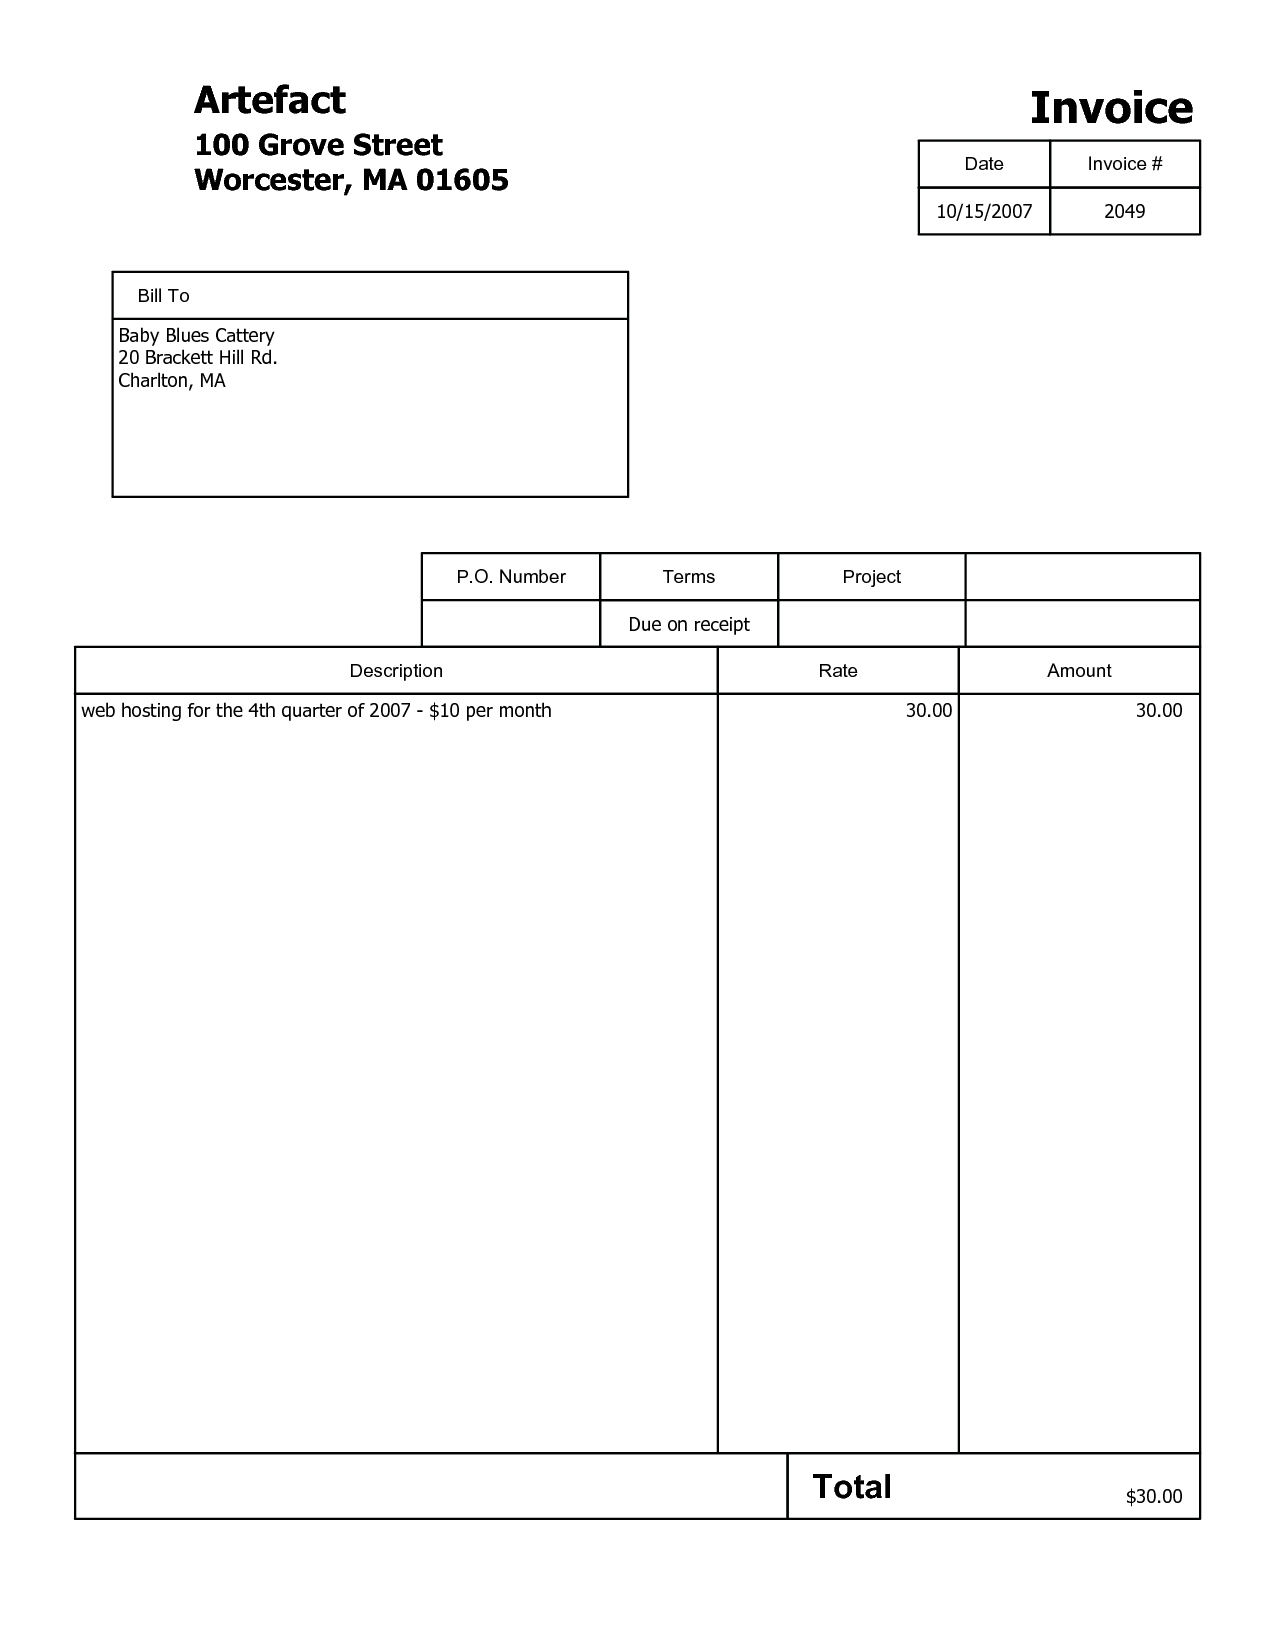 10 invoice template pdf samples to get payment quickly invoice sample pdf